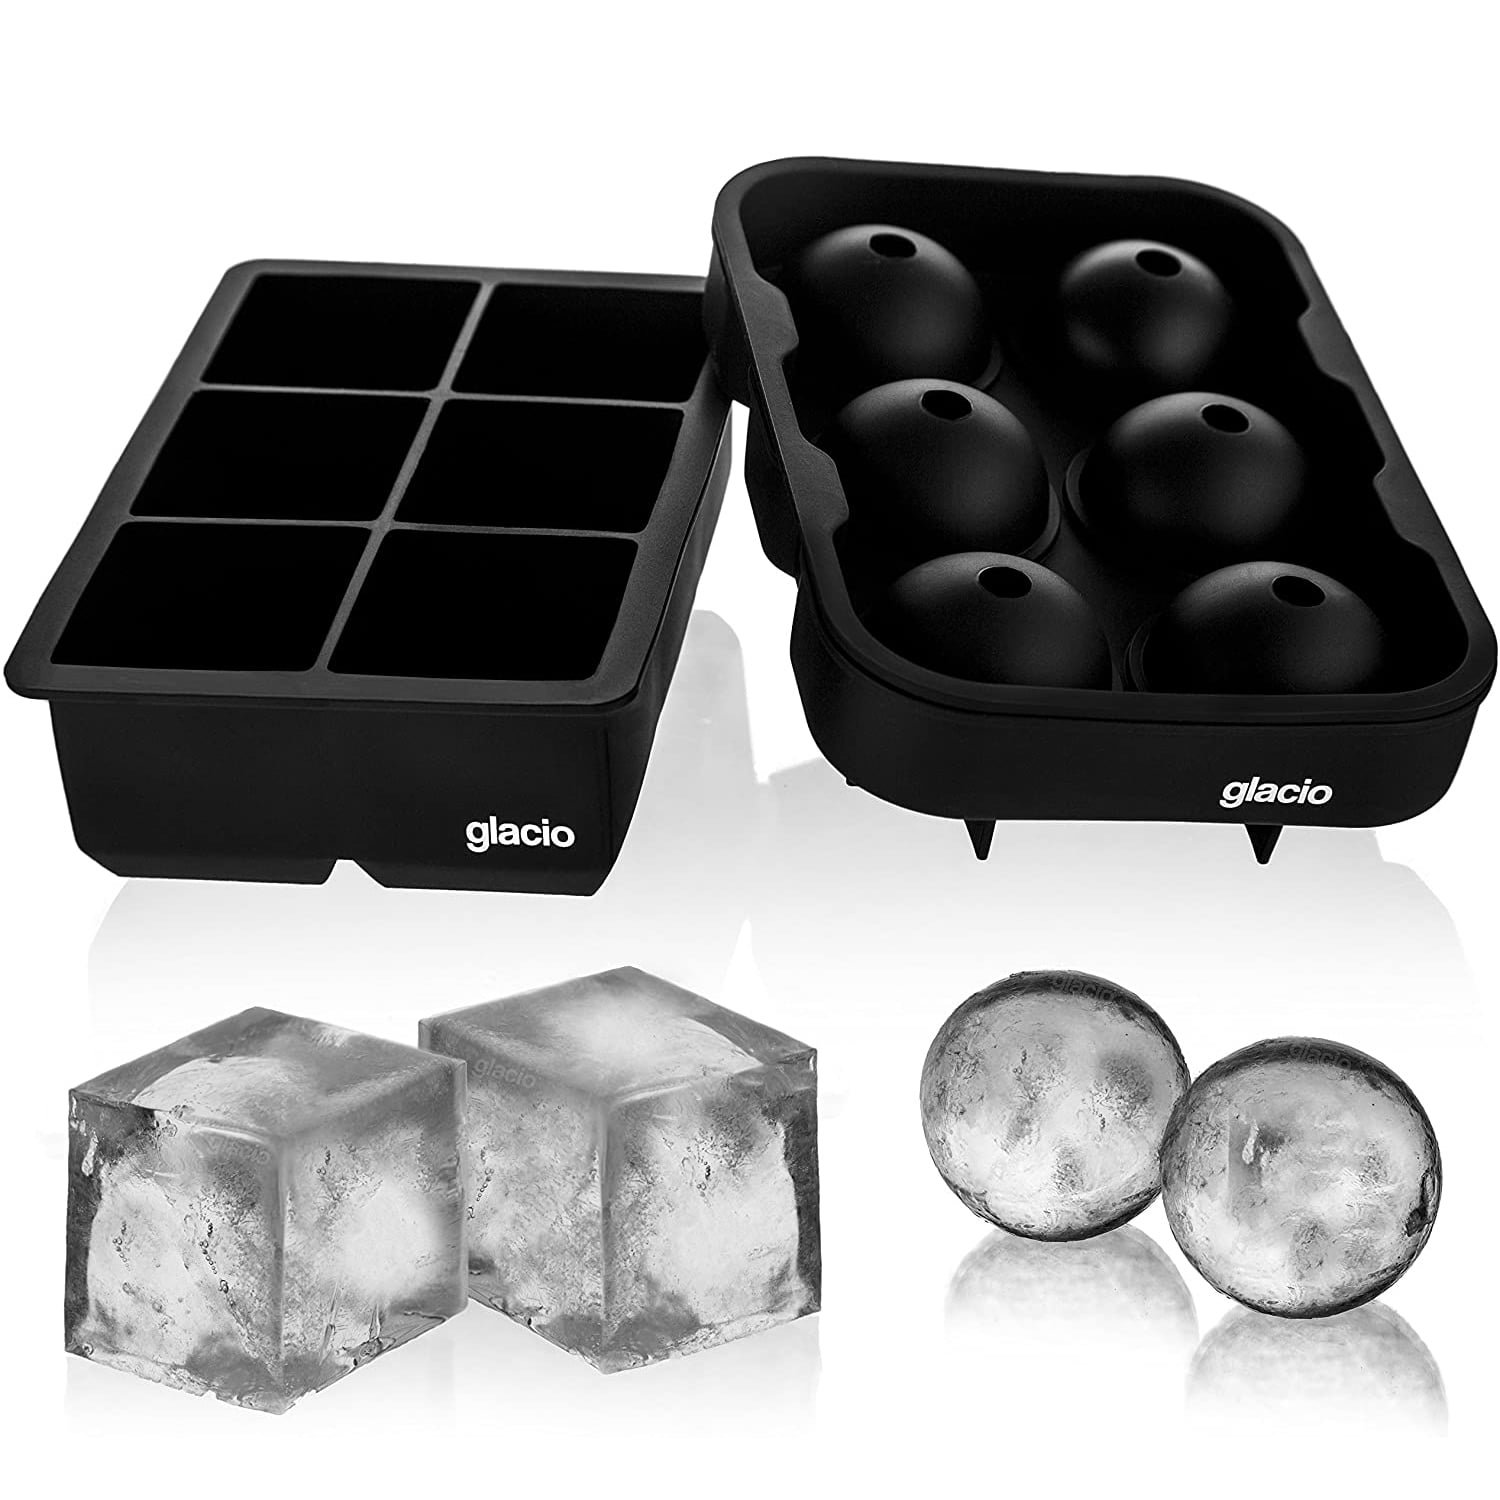  Glacio Small Ice Cube Silicone Trays with Lids - BPA-Free,  Flexible Ice Molds for Cocktails and Beverages - Set of 2: Home & Kitchen